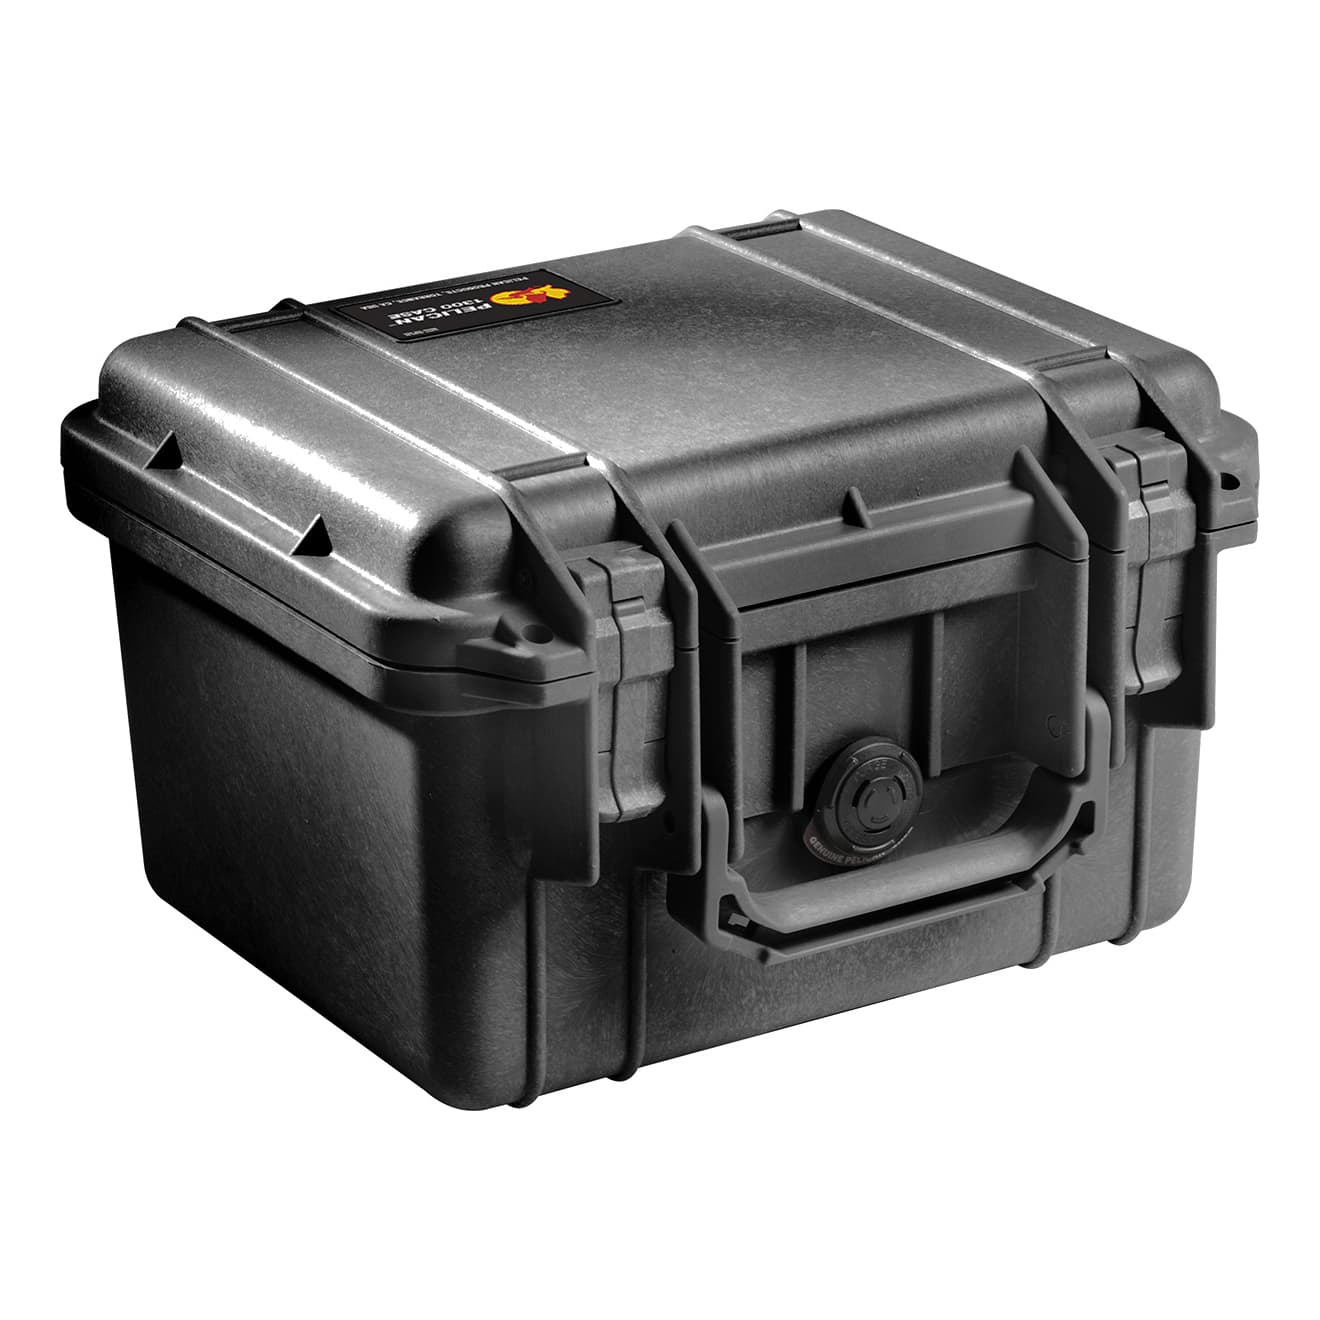 Waterproof Dry Sealed Box, Shockproof Case Storage Organizer, Shockproof  and Pressure-Proof Sealed Storage Box for Survival(170 * 110 * 48mm), Dry  Boxes -  Canada